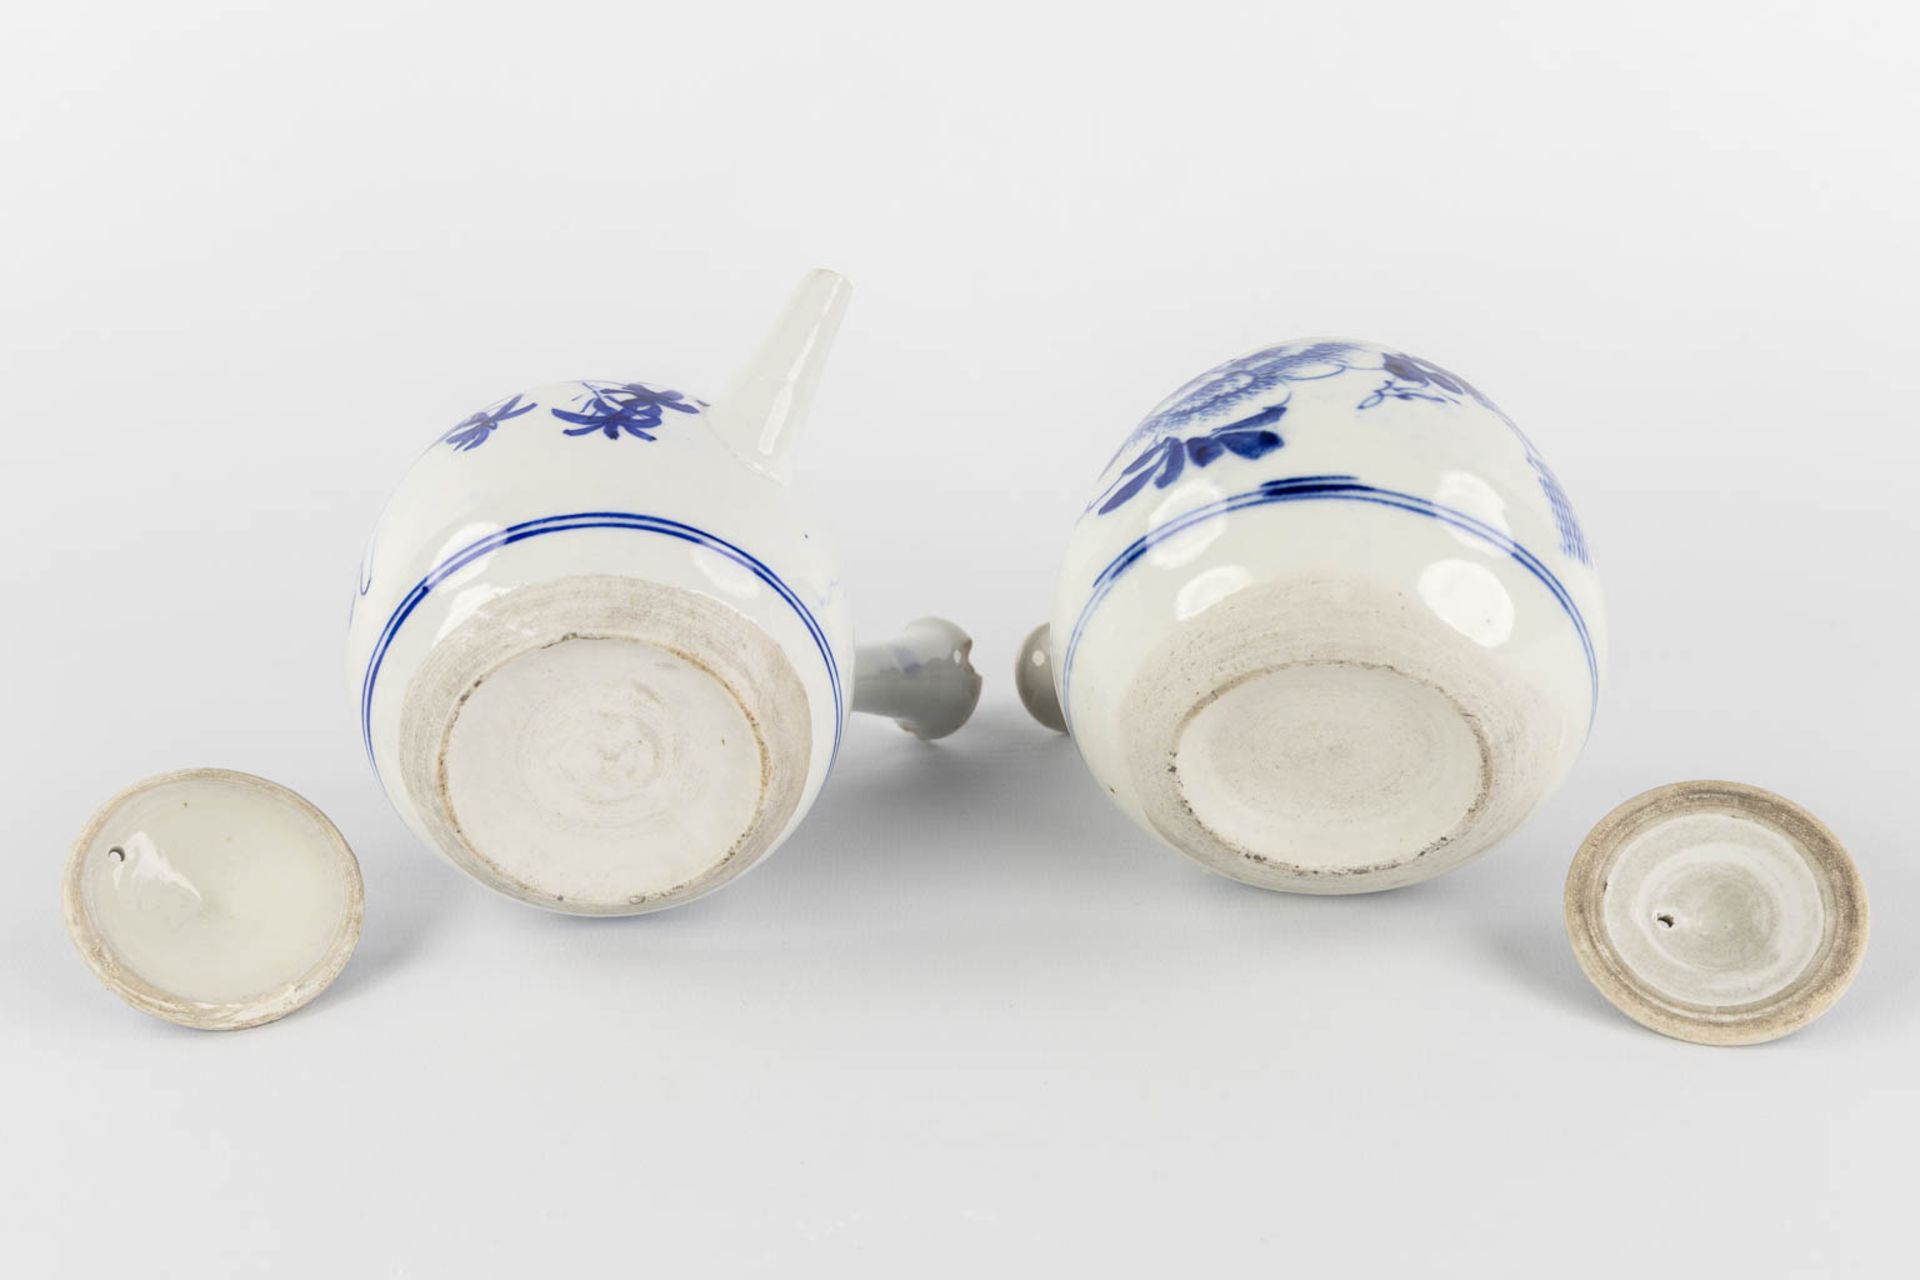 Three Chinese and Japanese teapots, blue-white decor. (W:20 x H:14 cm) - Image 13 of 17